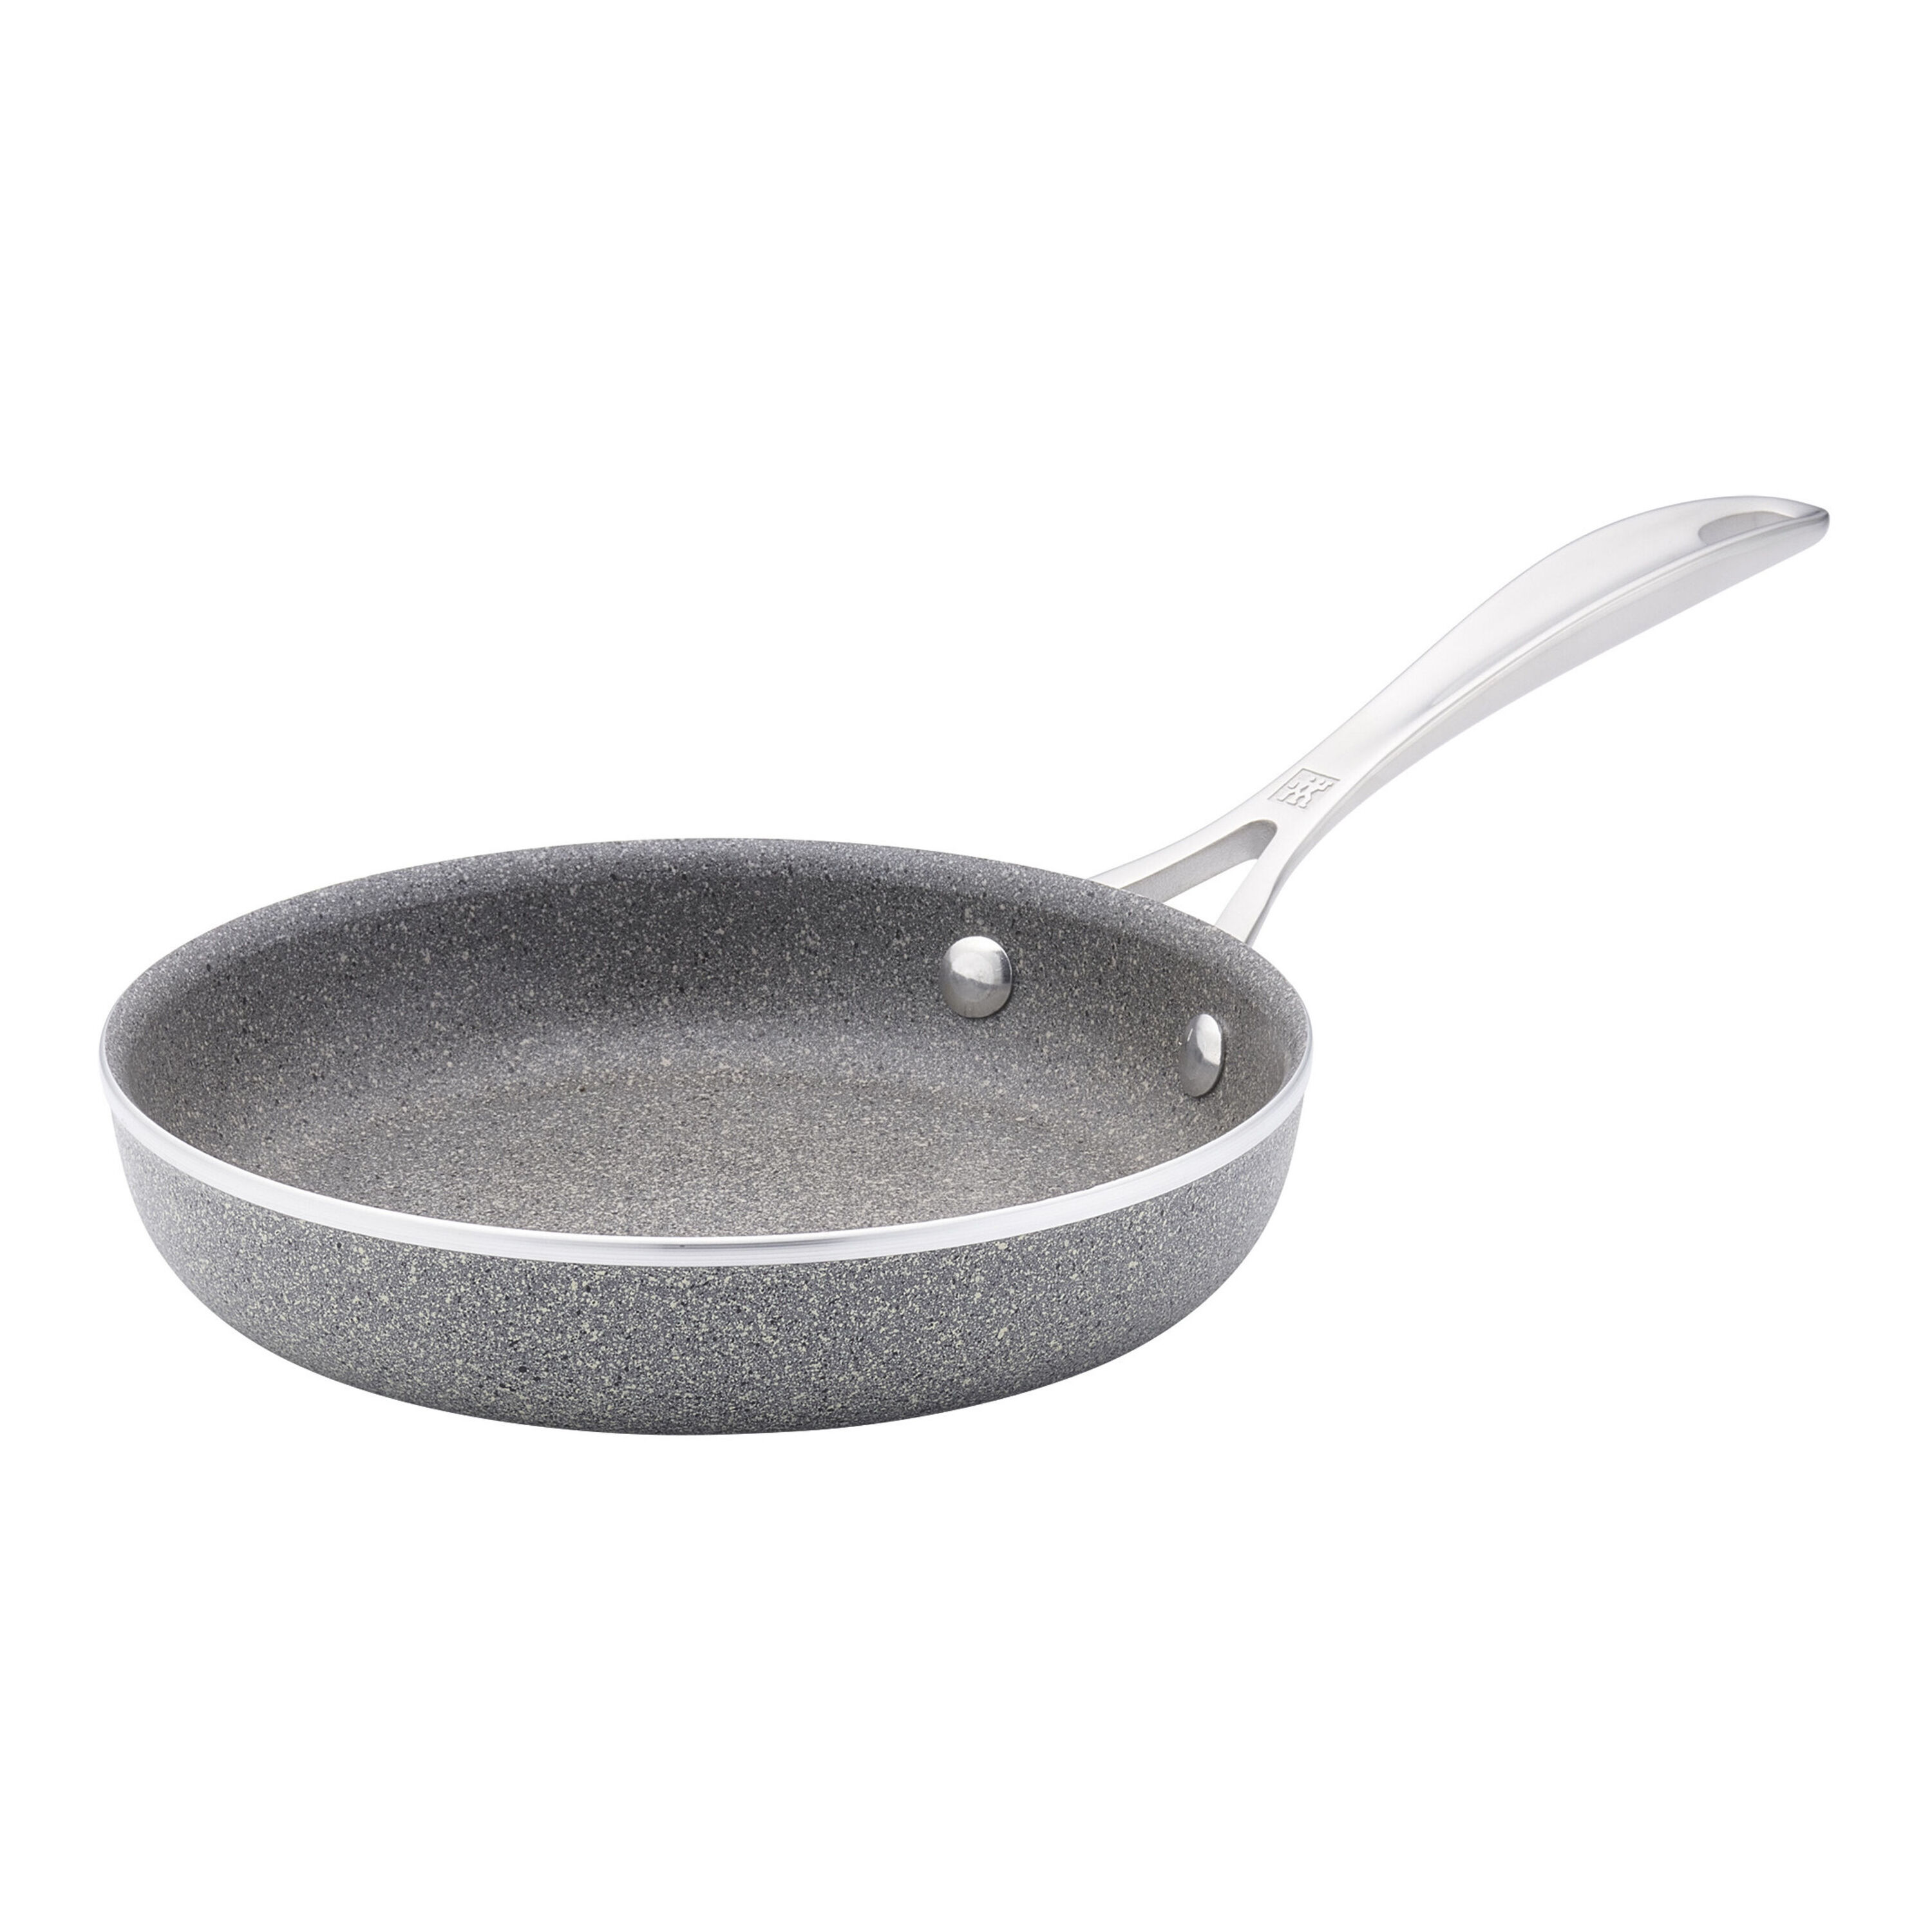 Cook N Home Ultra Granite Nonstick Skillet Fry Pan, 12 inches, 12